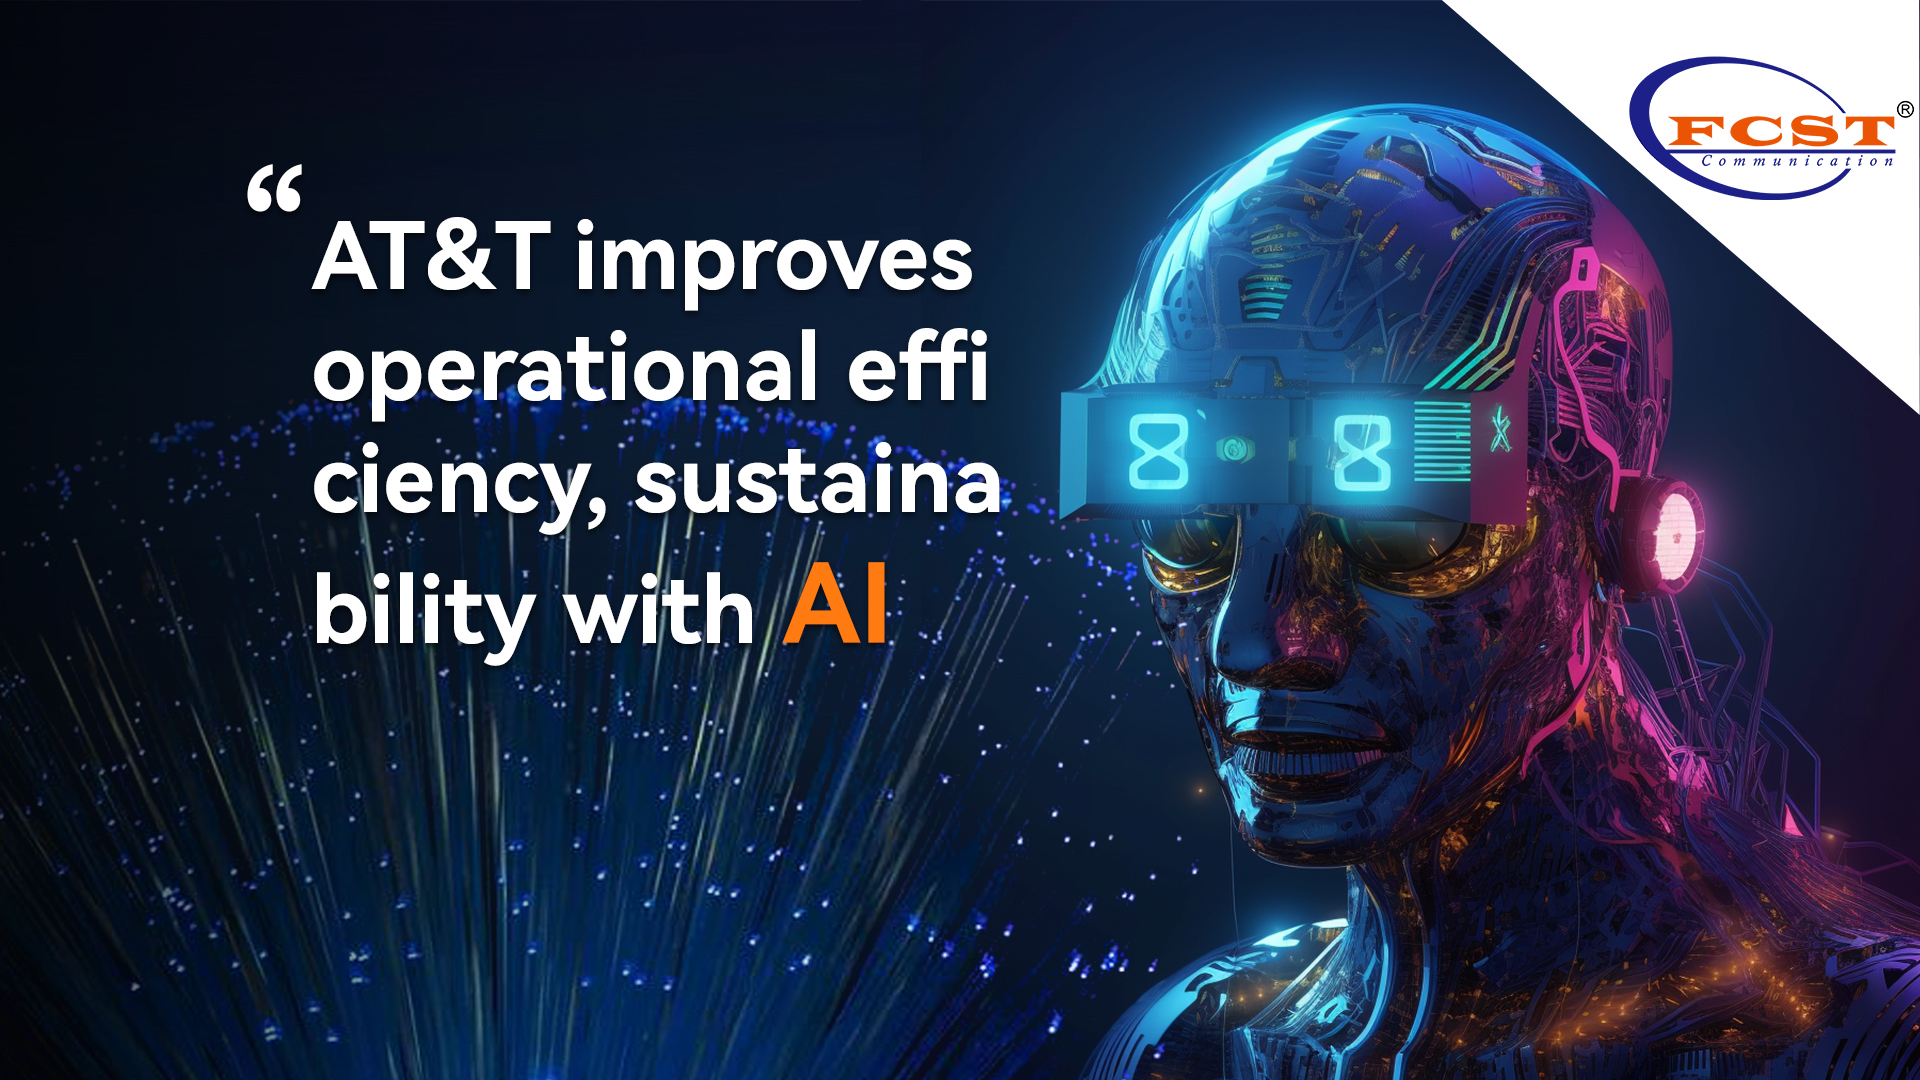 AT&T improves operational efficiency, sustainability with AI